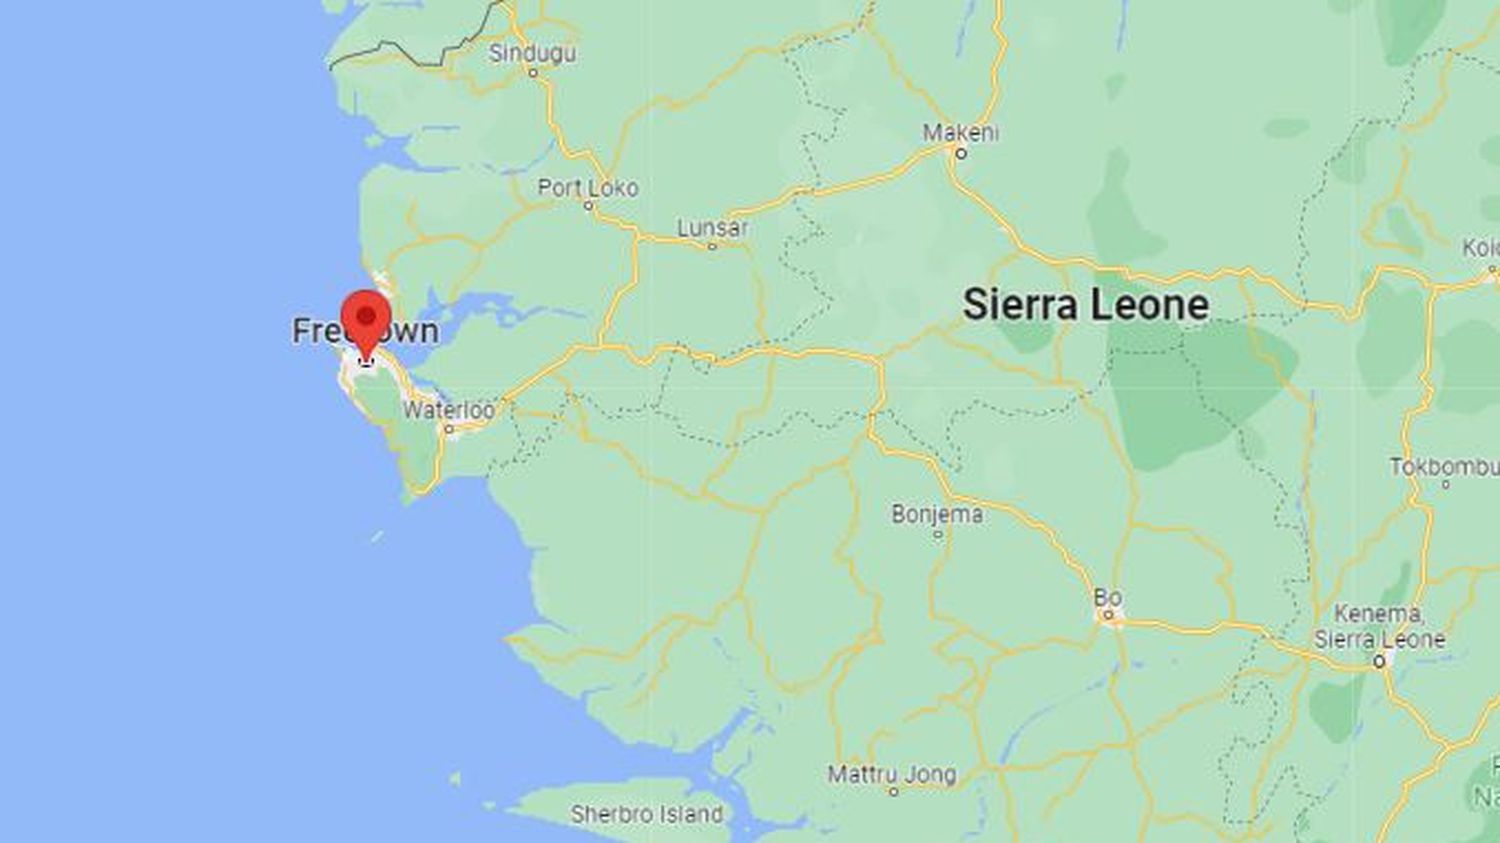 Sierra Leone: two police officers killed during demonstrations against high prices, a curfew introduced
